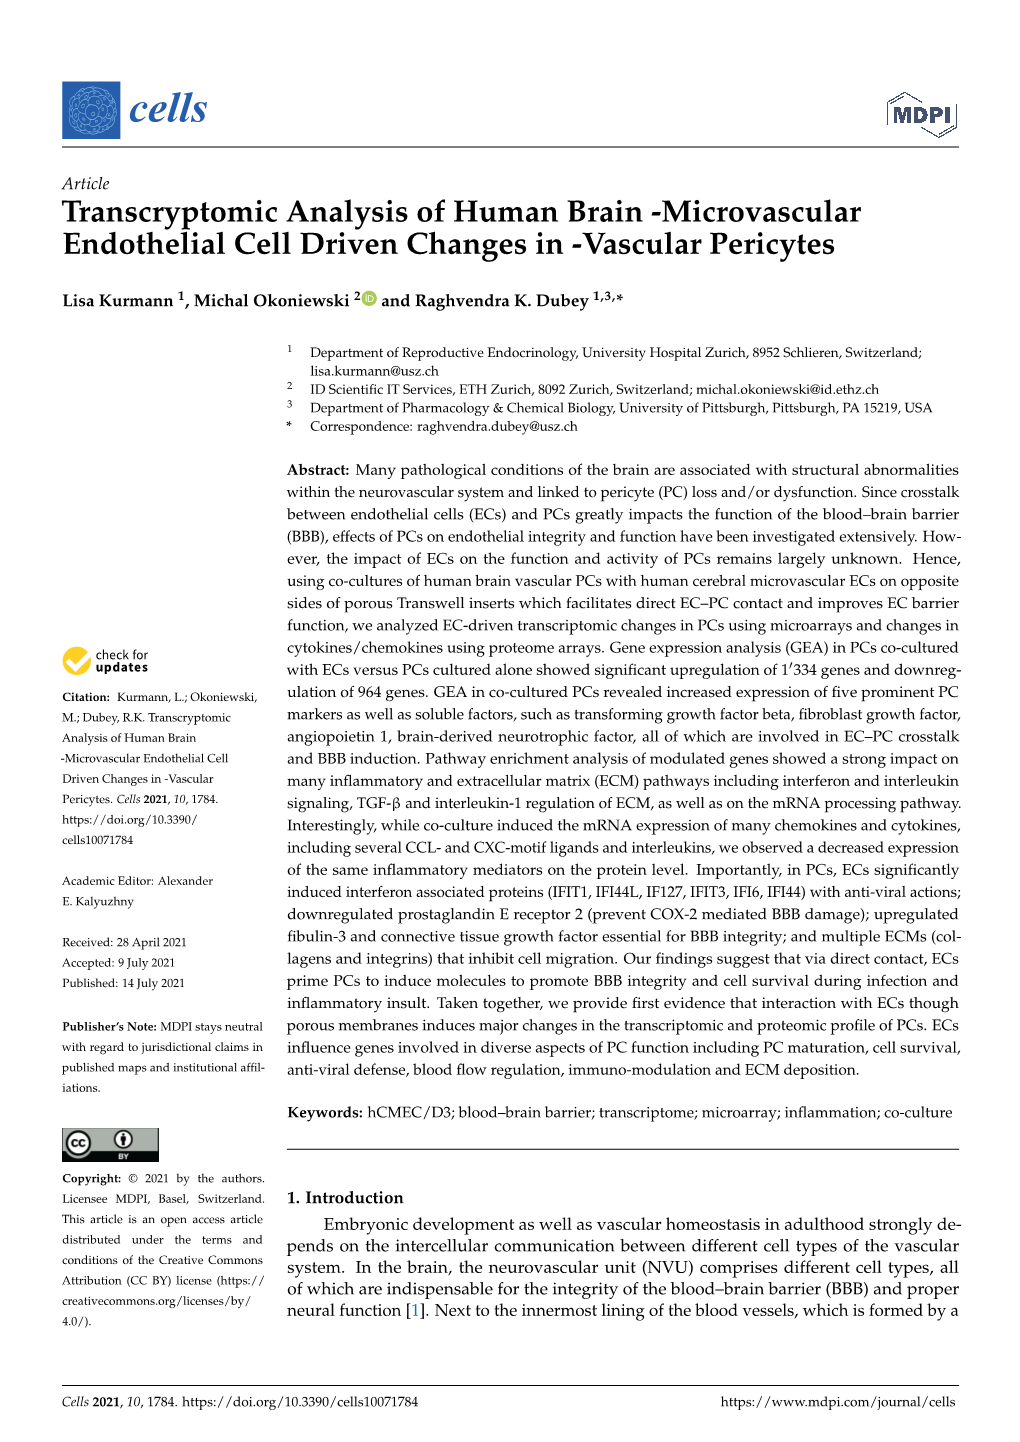 Microvascular Endothelial Cell Driven Changes in -Vascular Pericytes